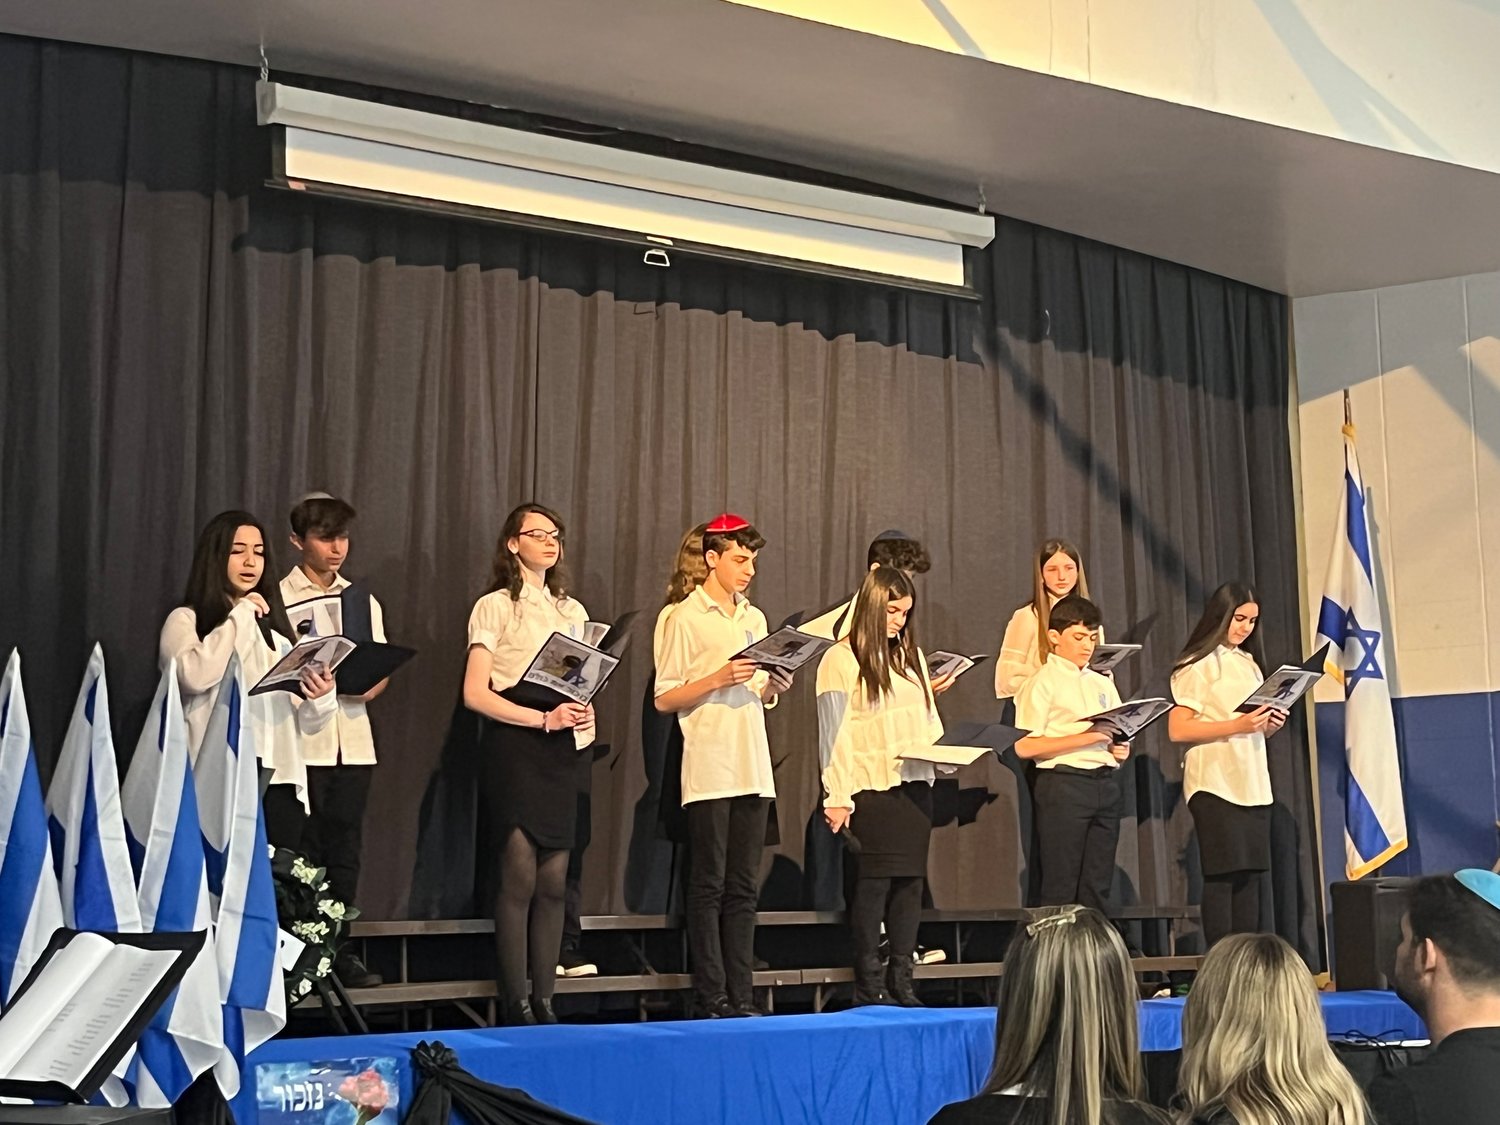 Seventh-graders at The Brandeis School in Lawrence each read a letter — written by a fallen Israeli soldier to their family during wartime —  as part of its Yom HaZikaron ceremony.